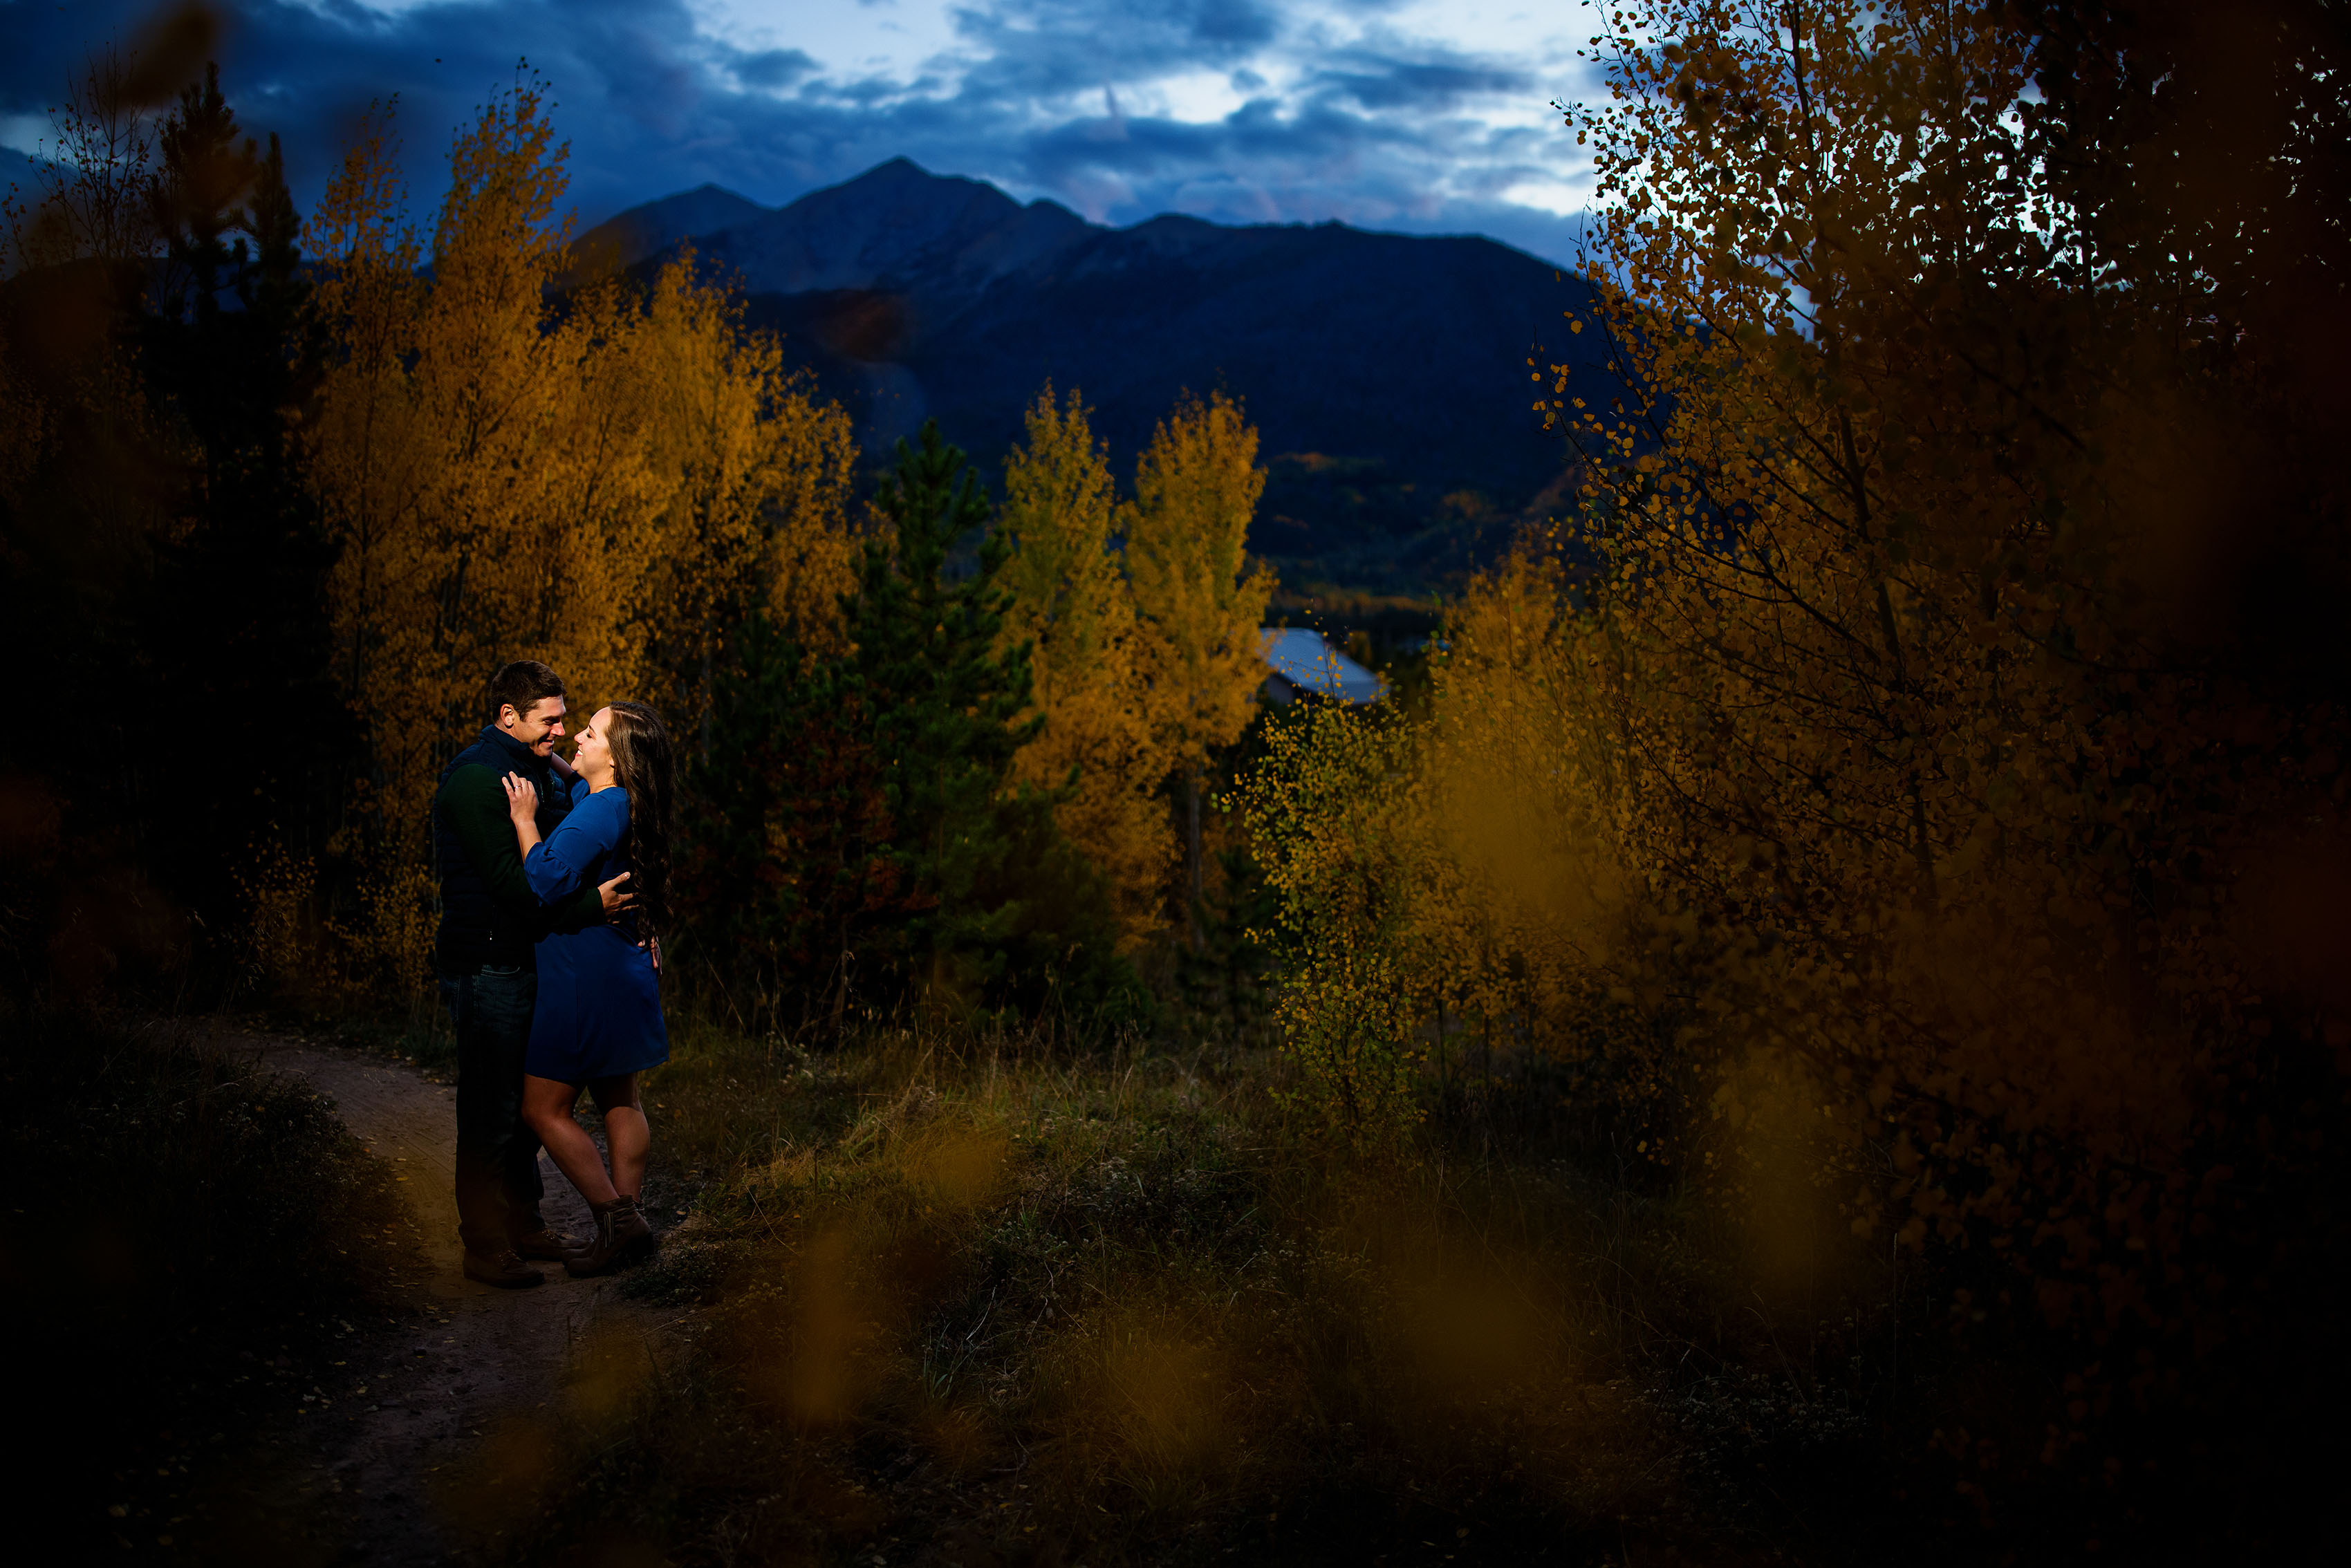 Danielle and Gabe pose at twilight on a trail near Frisco, Colorado